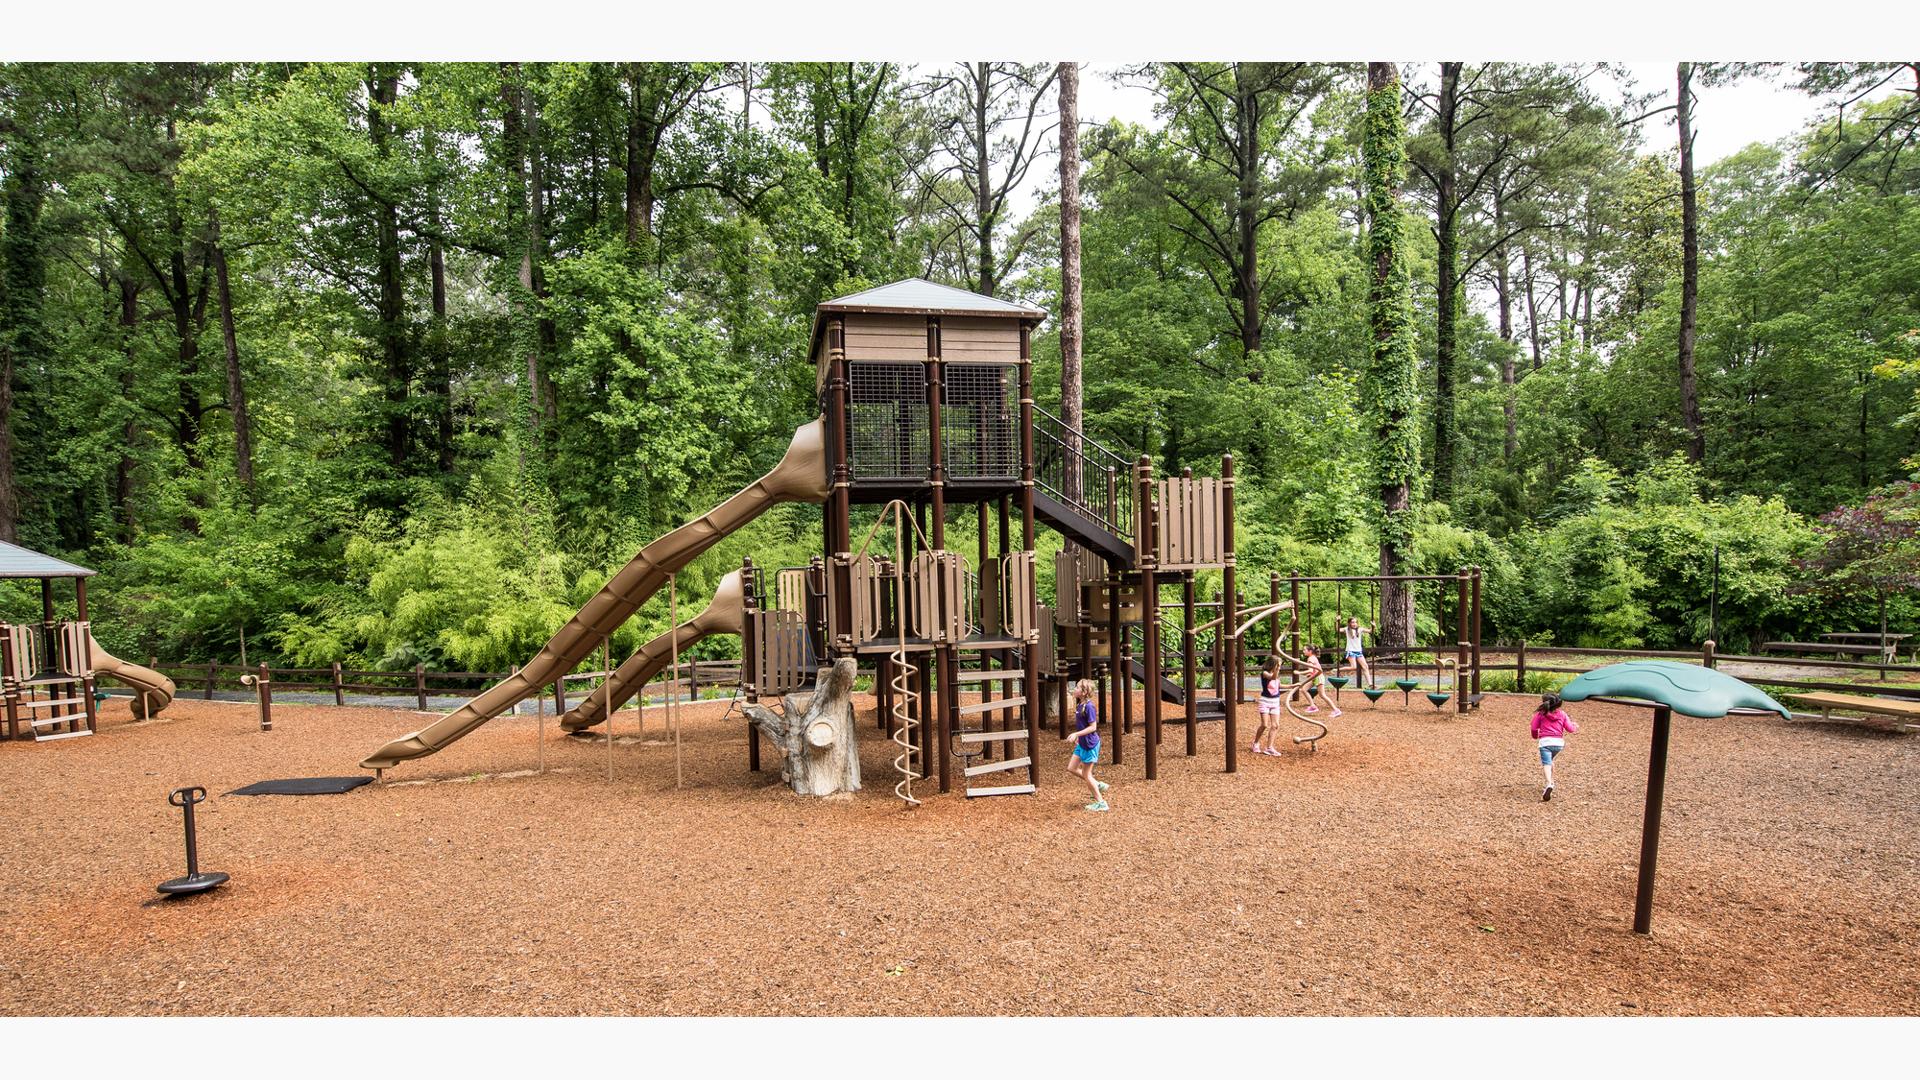 Surrounded by trees, kids play on a custom nature-inspired playground design.